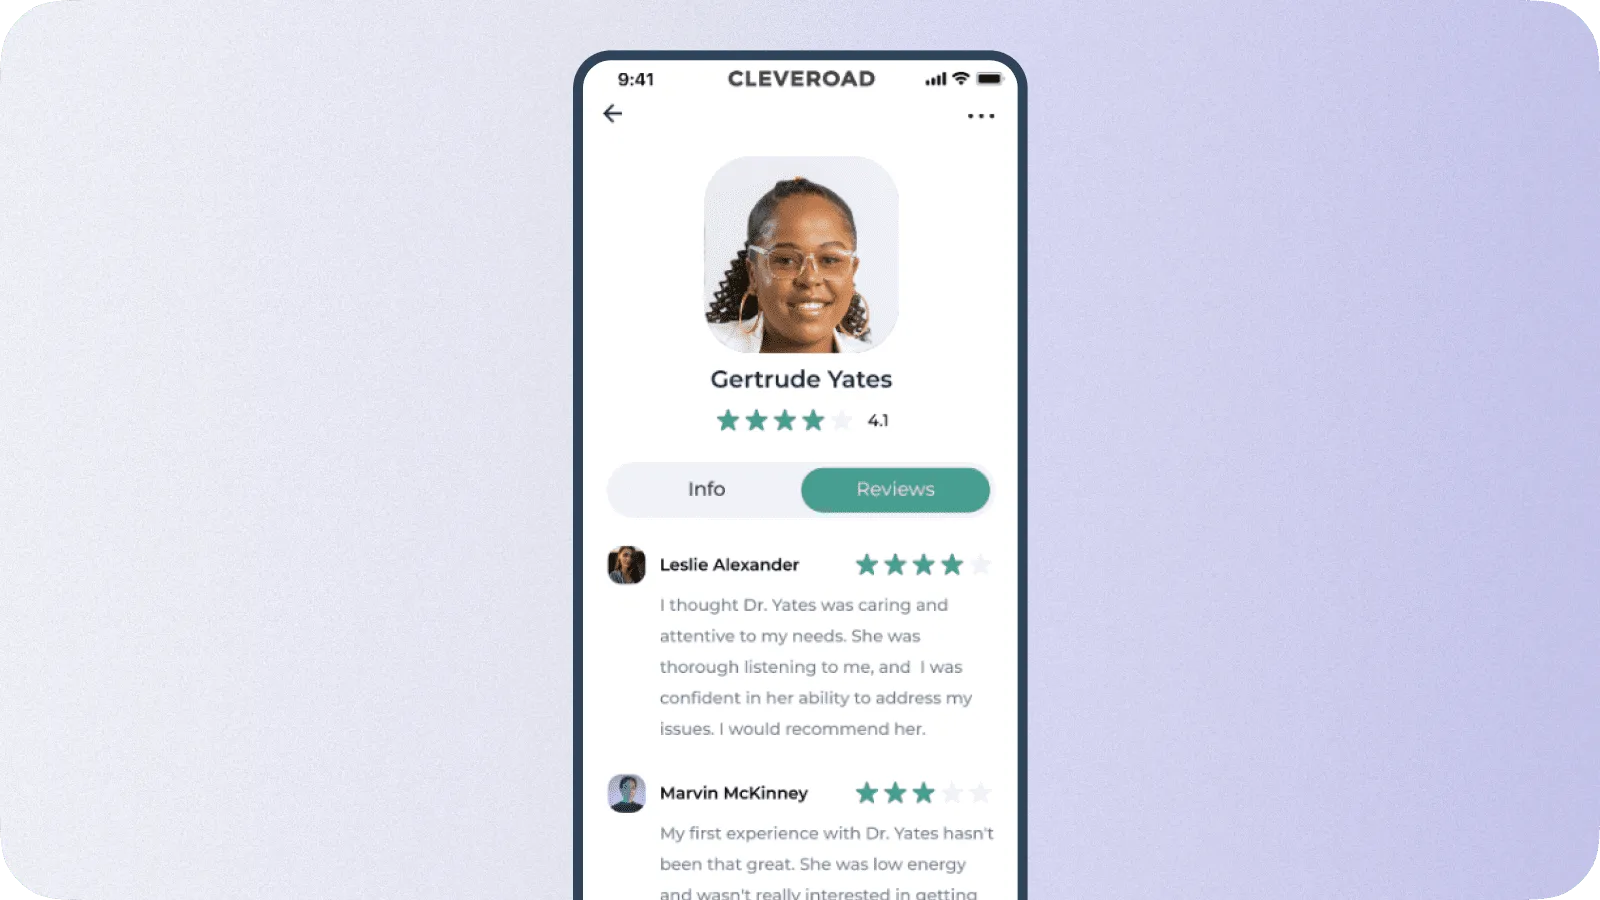 Reviews and ratings functionality designed by Cleveroad